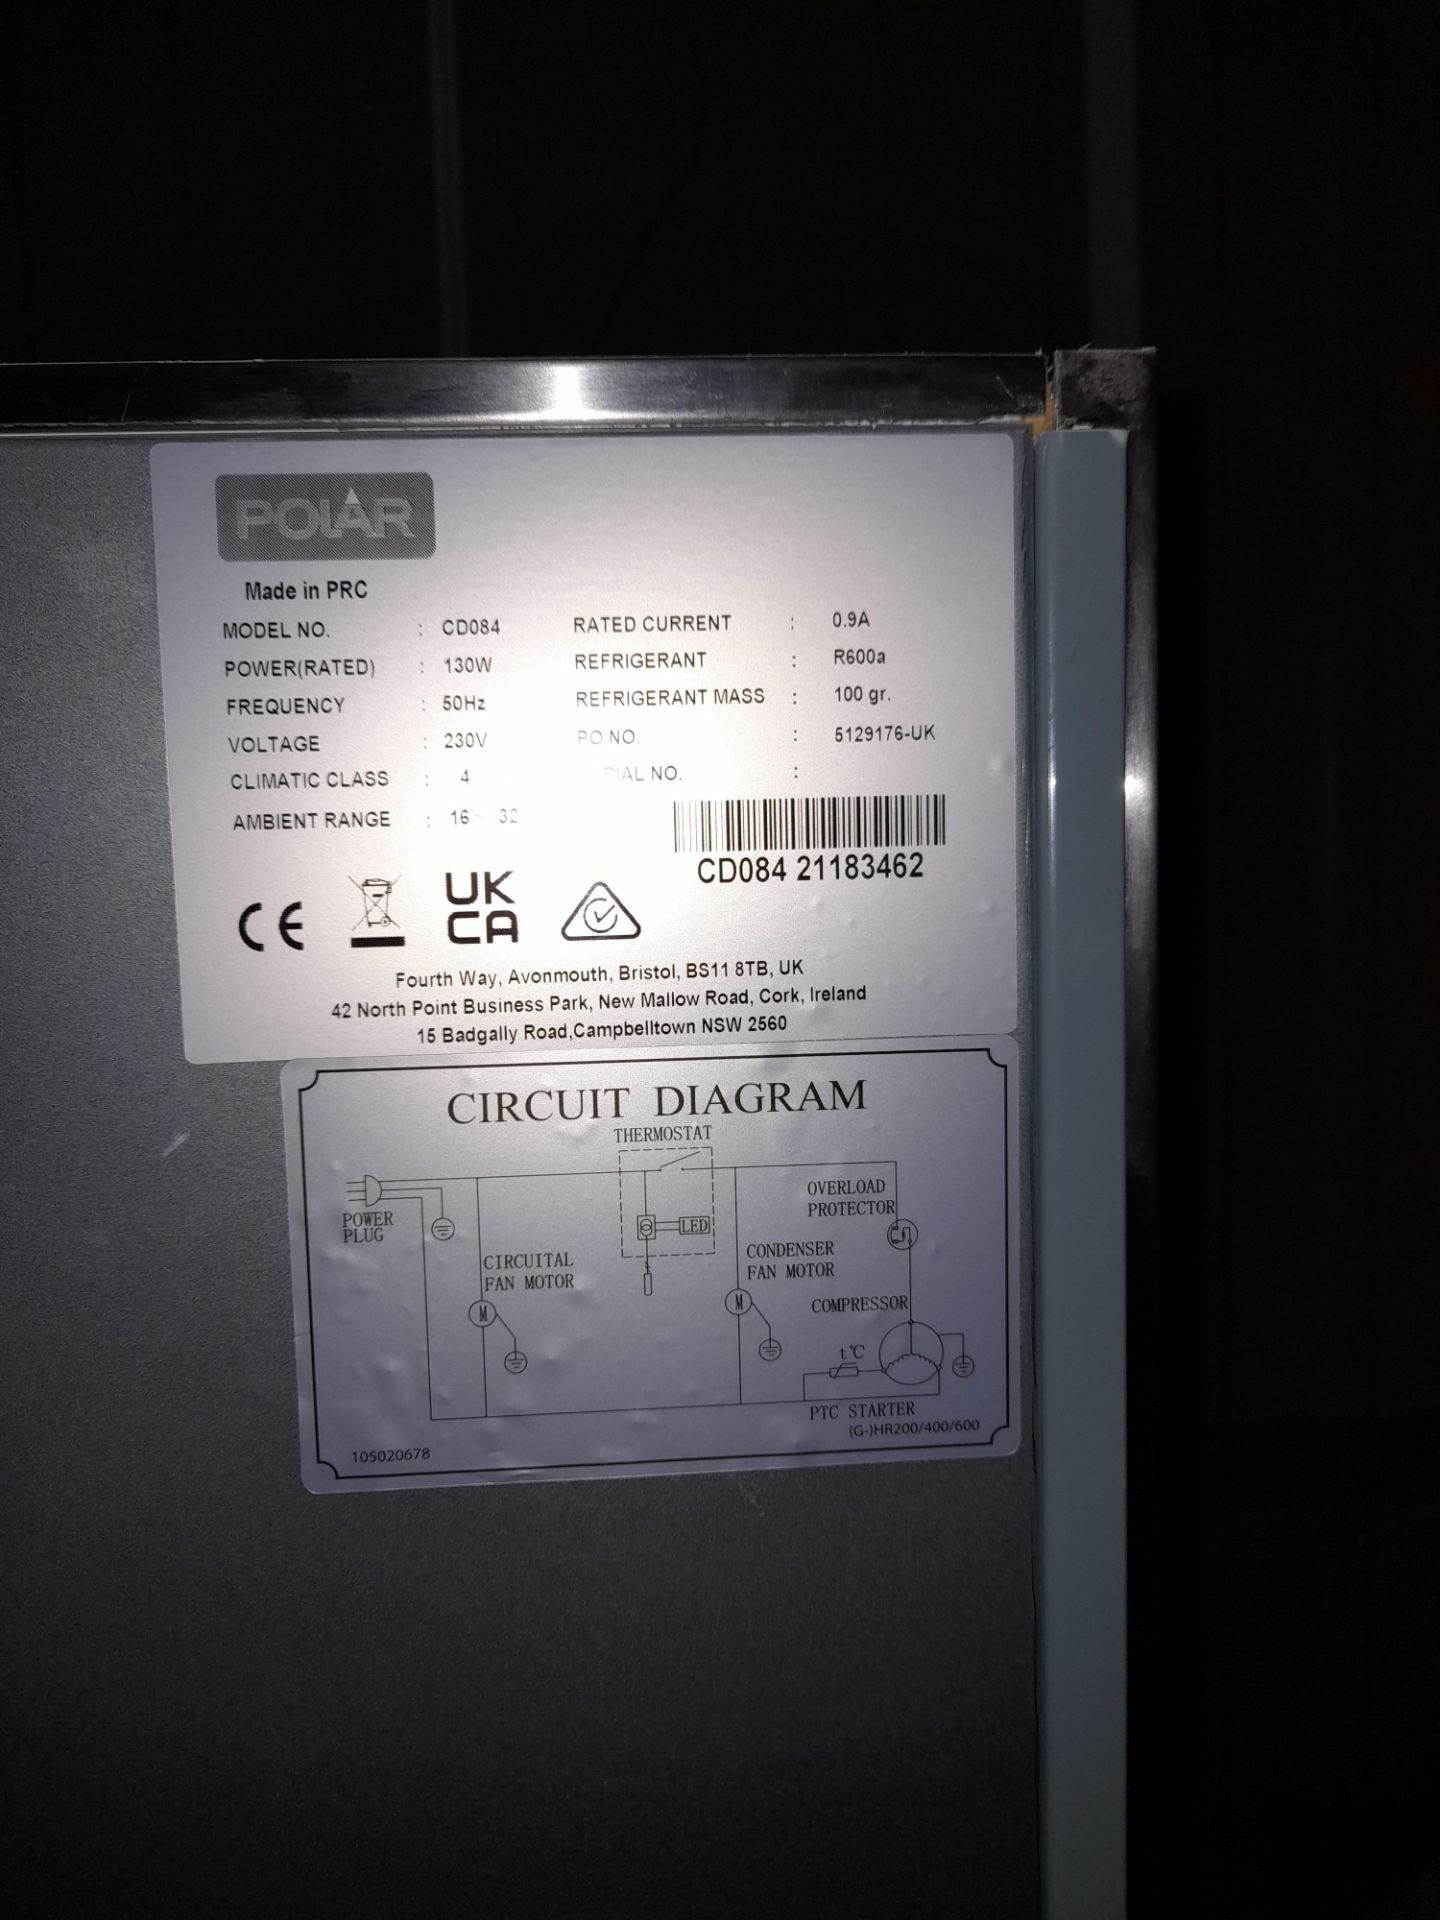 Polar CD084 stainless steel upright refrigerator (Approx. 770 x 1900 x 700) – Located Manchester - Image 2 of 2